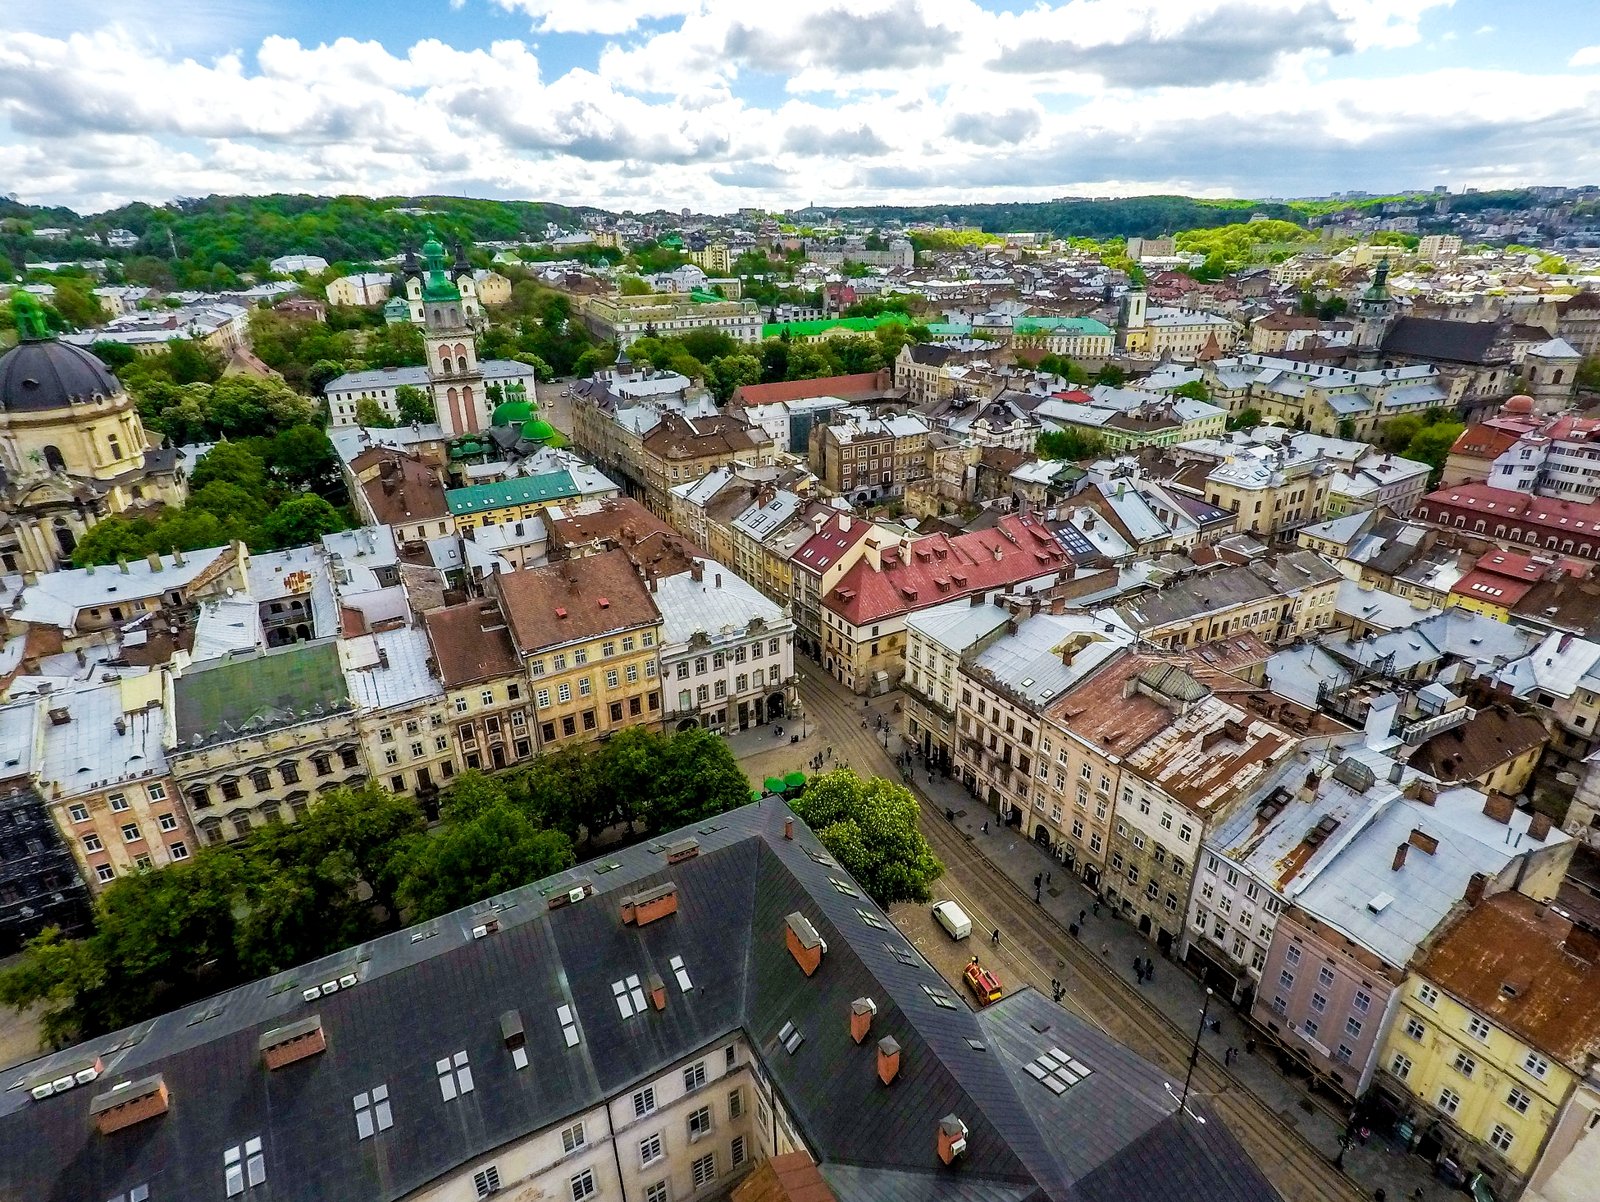 How to climb the Town Hall in Lviv